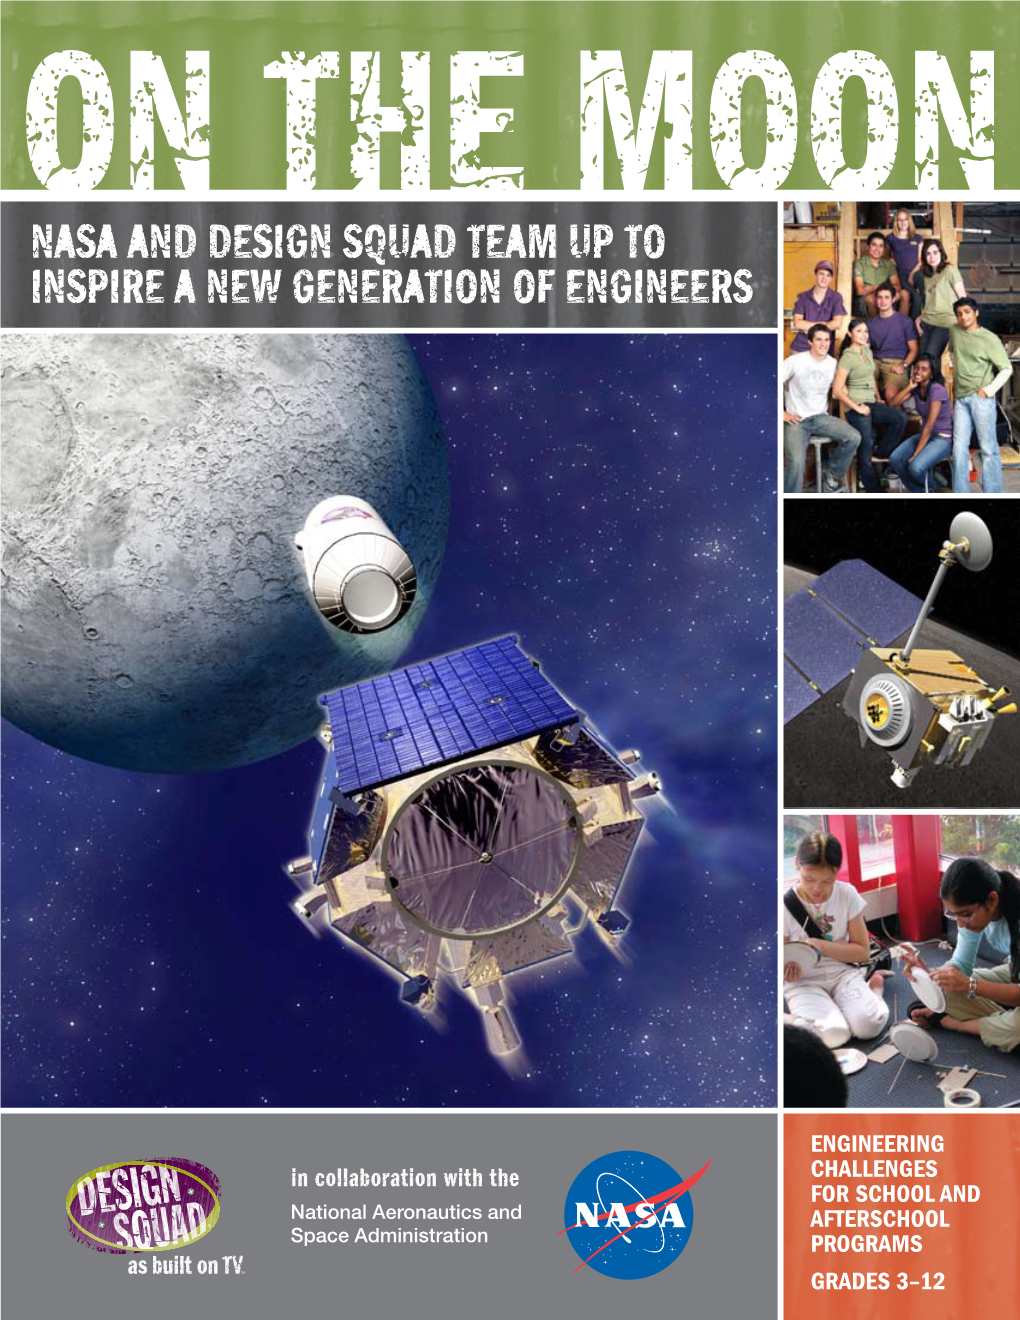 NASA and Design Squad Team up to Inspire a New Generation of Engineers